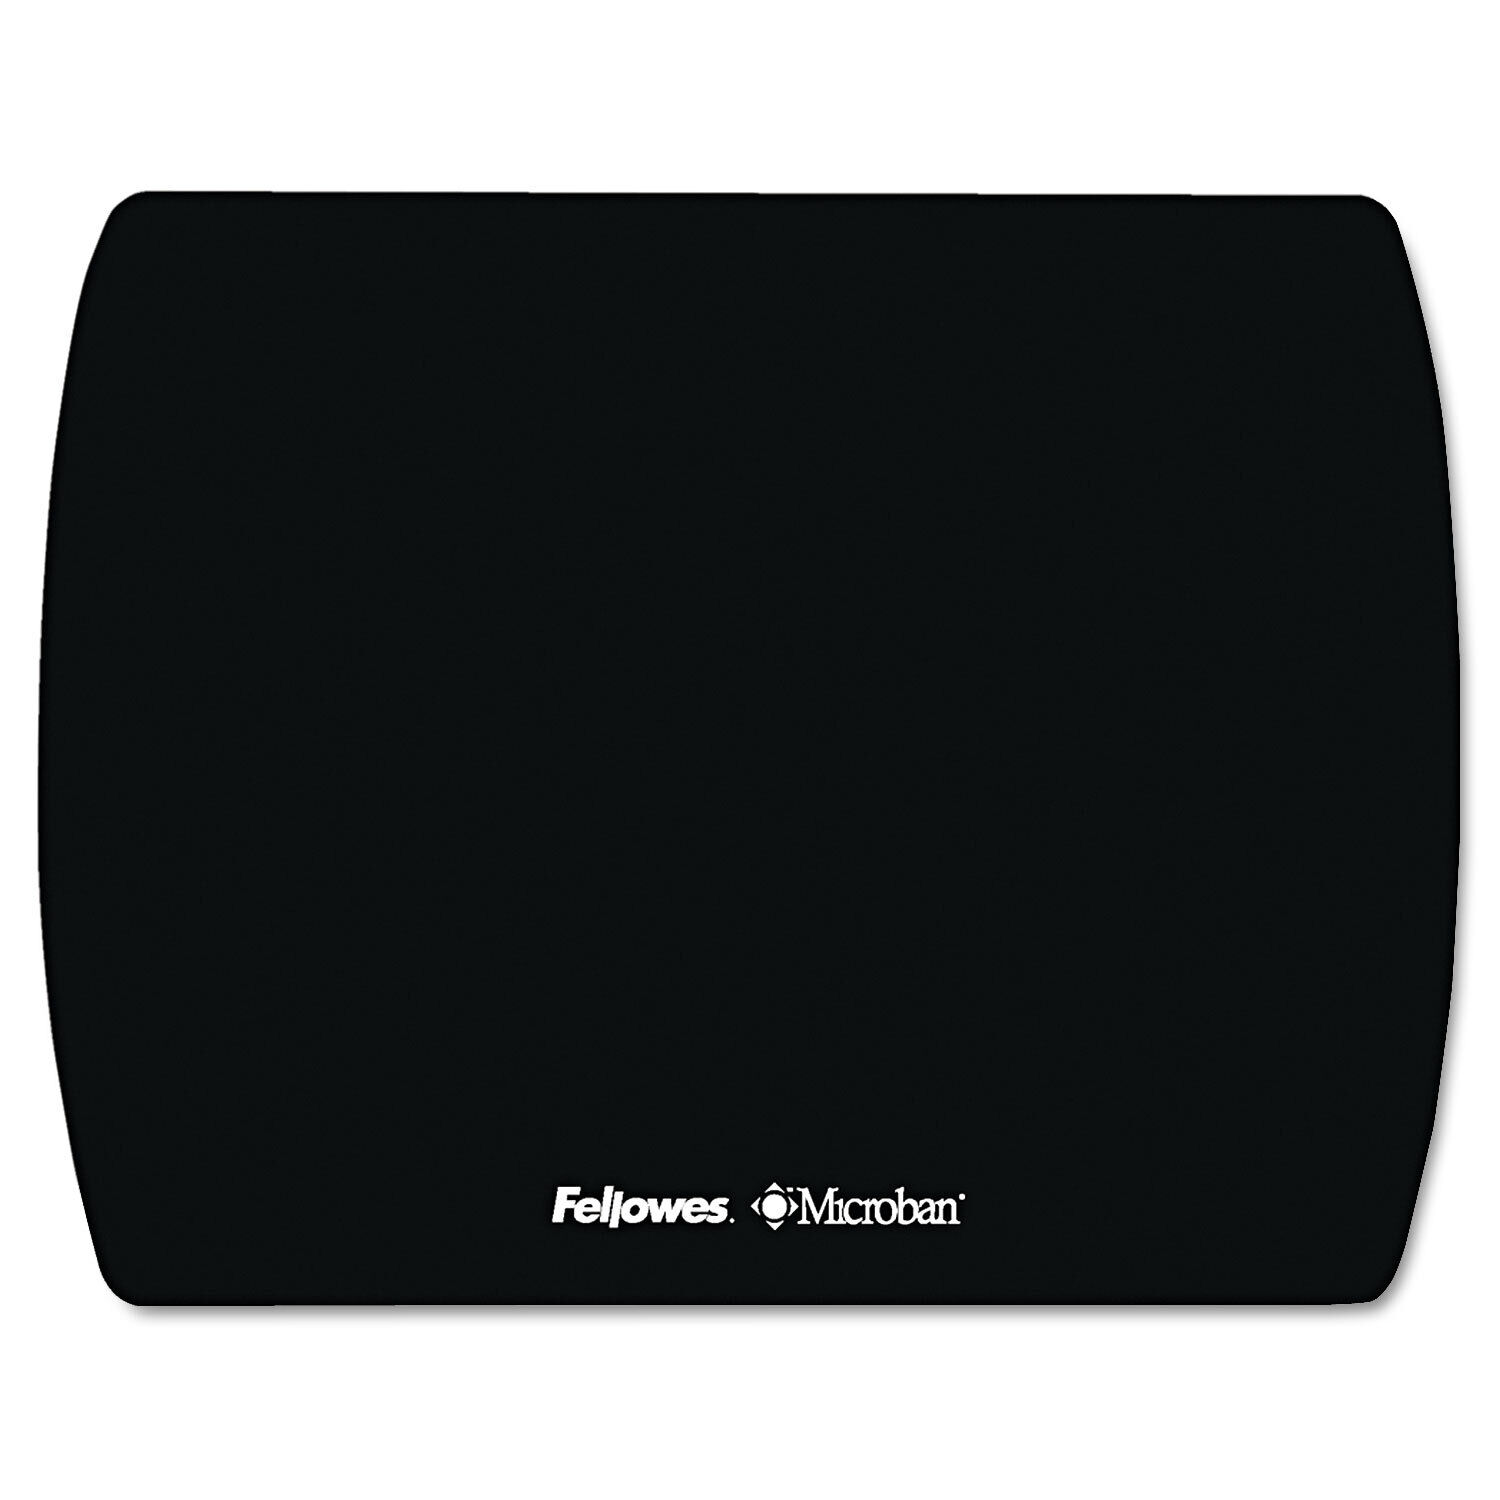 Fellowes Microban Ultra Thin Mouse Pad Black 5908101